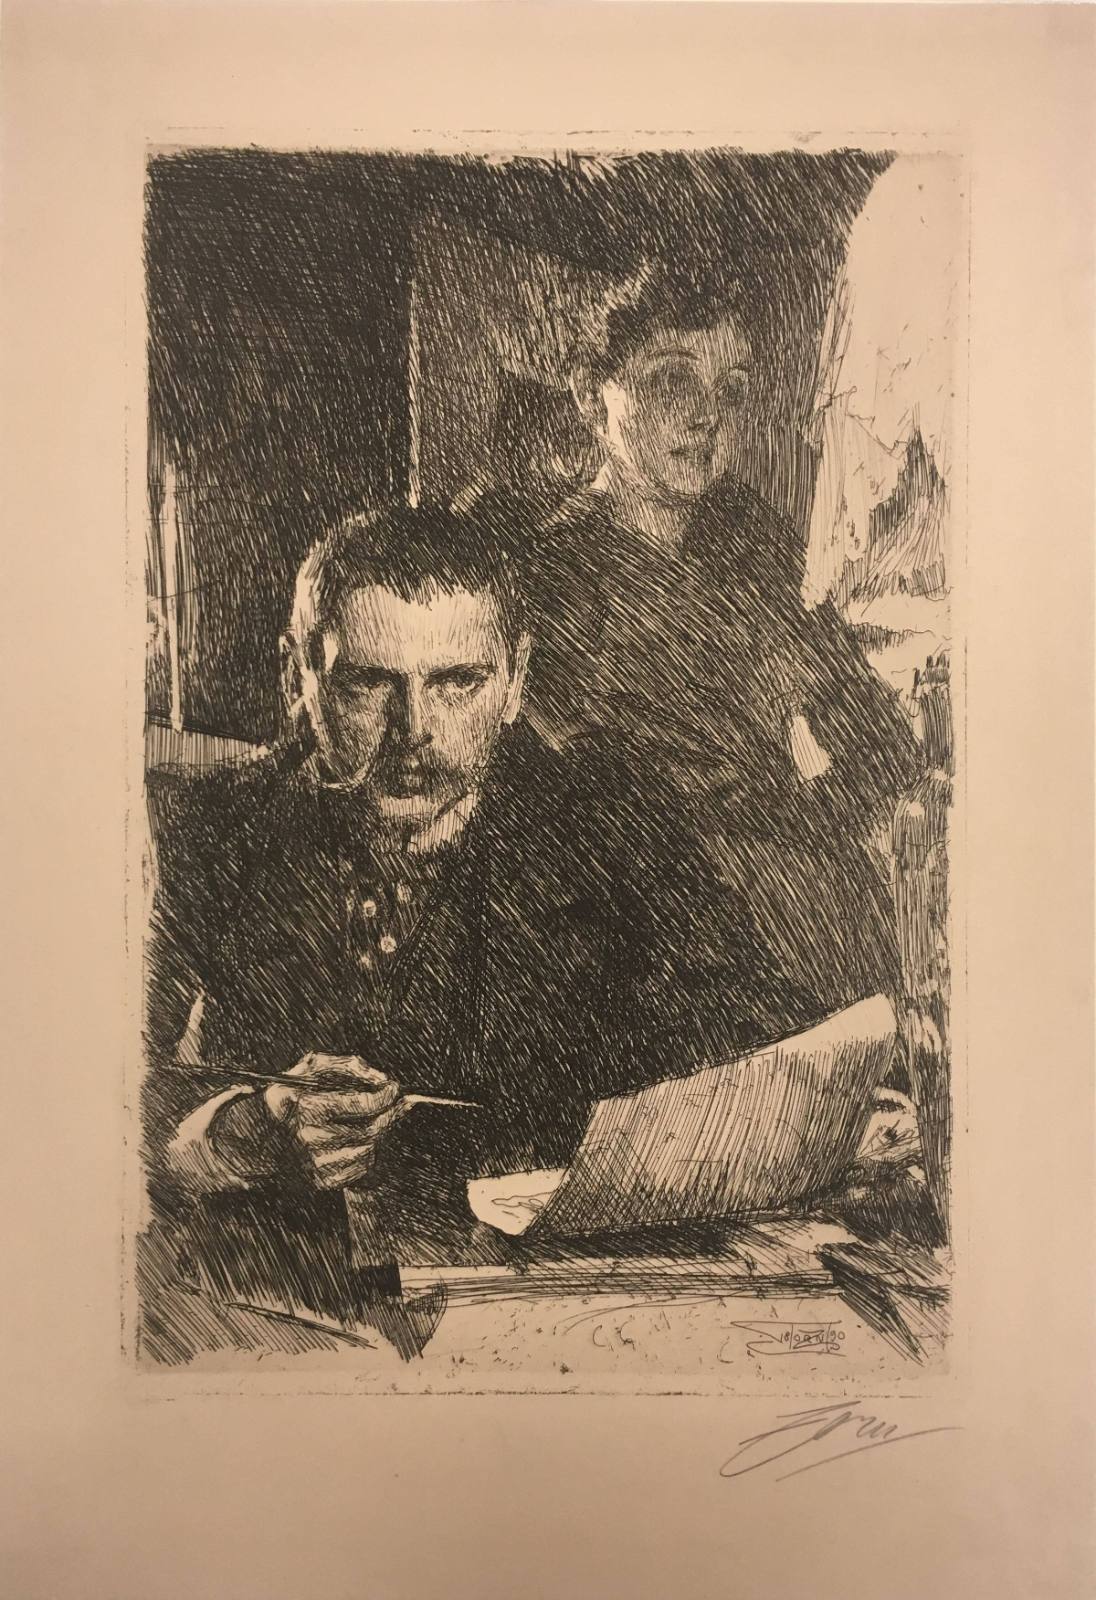 Zorn and his Wife